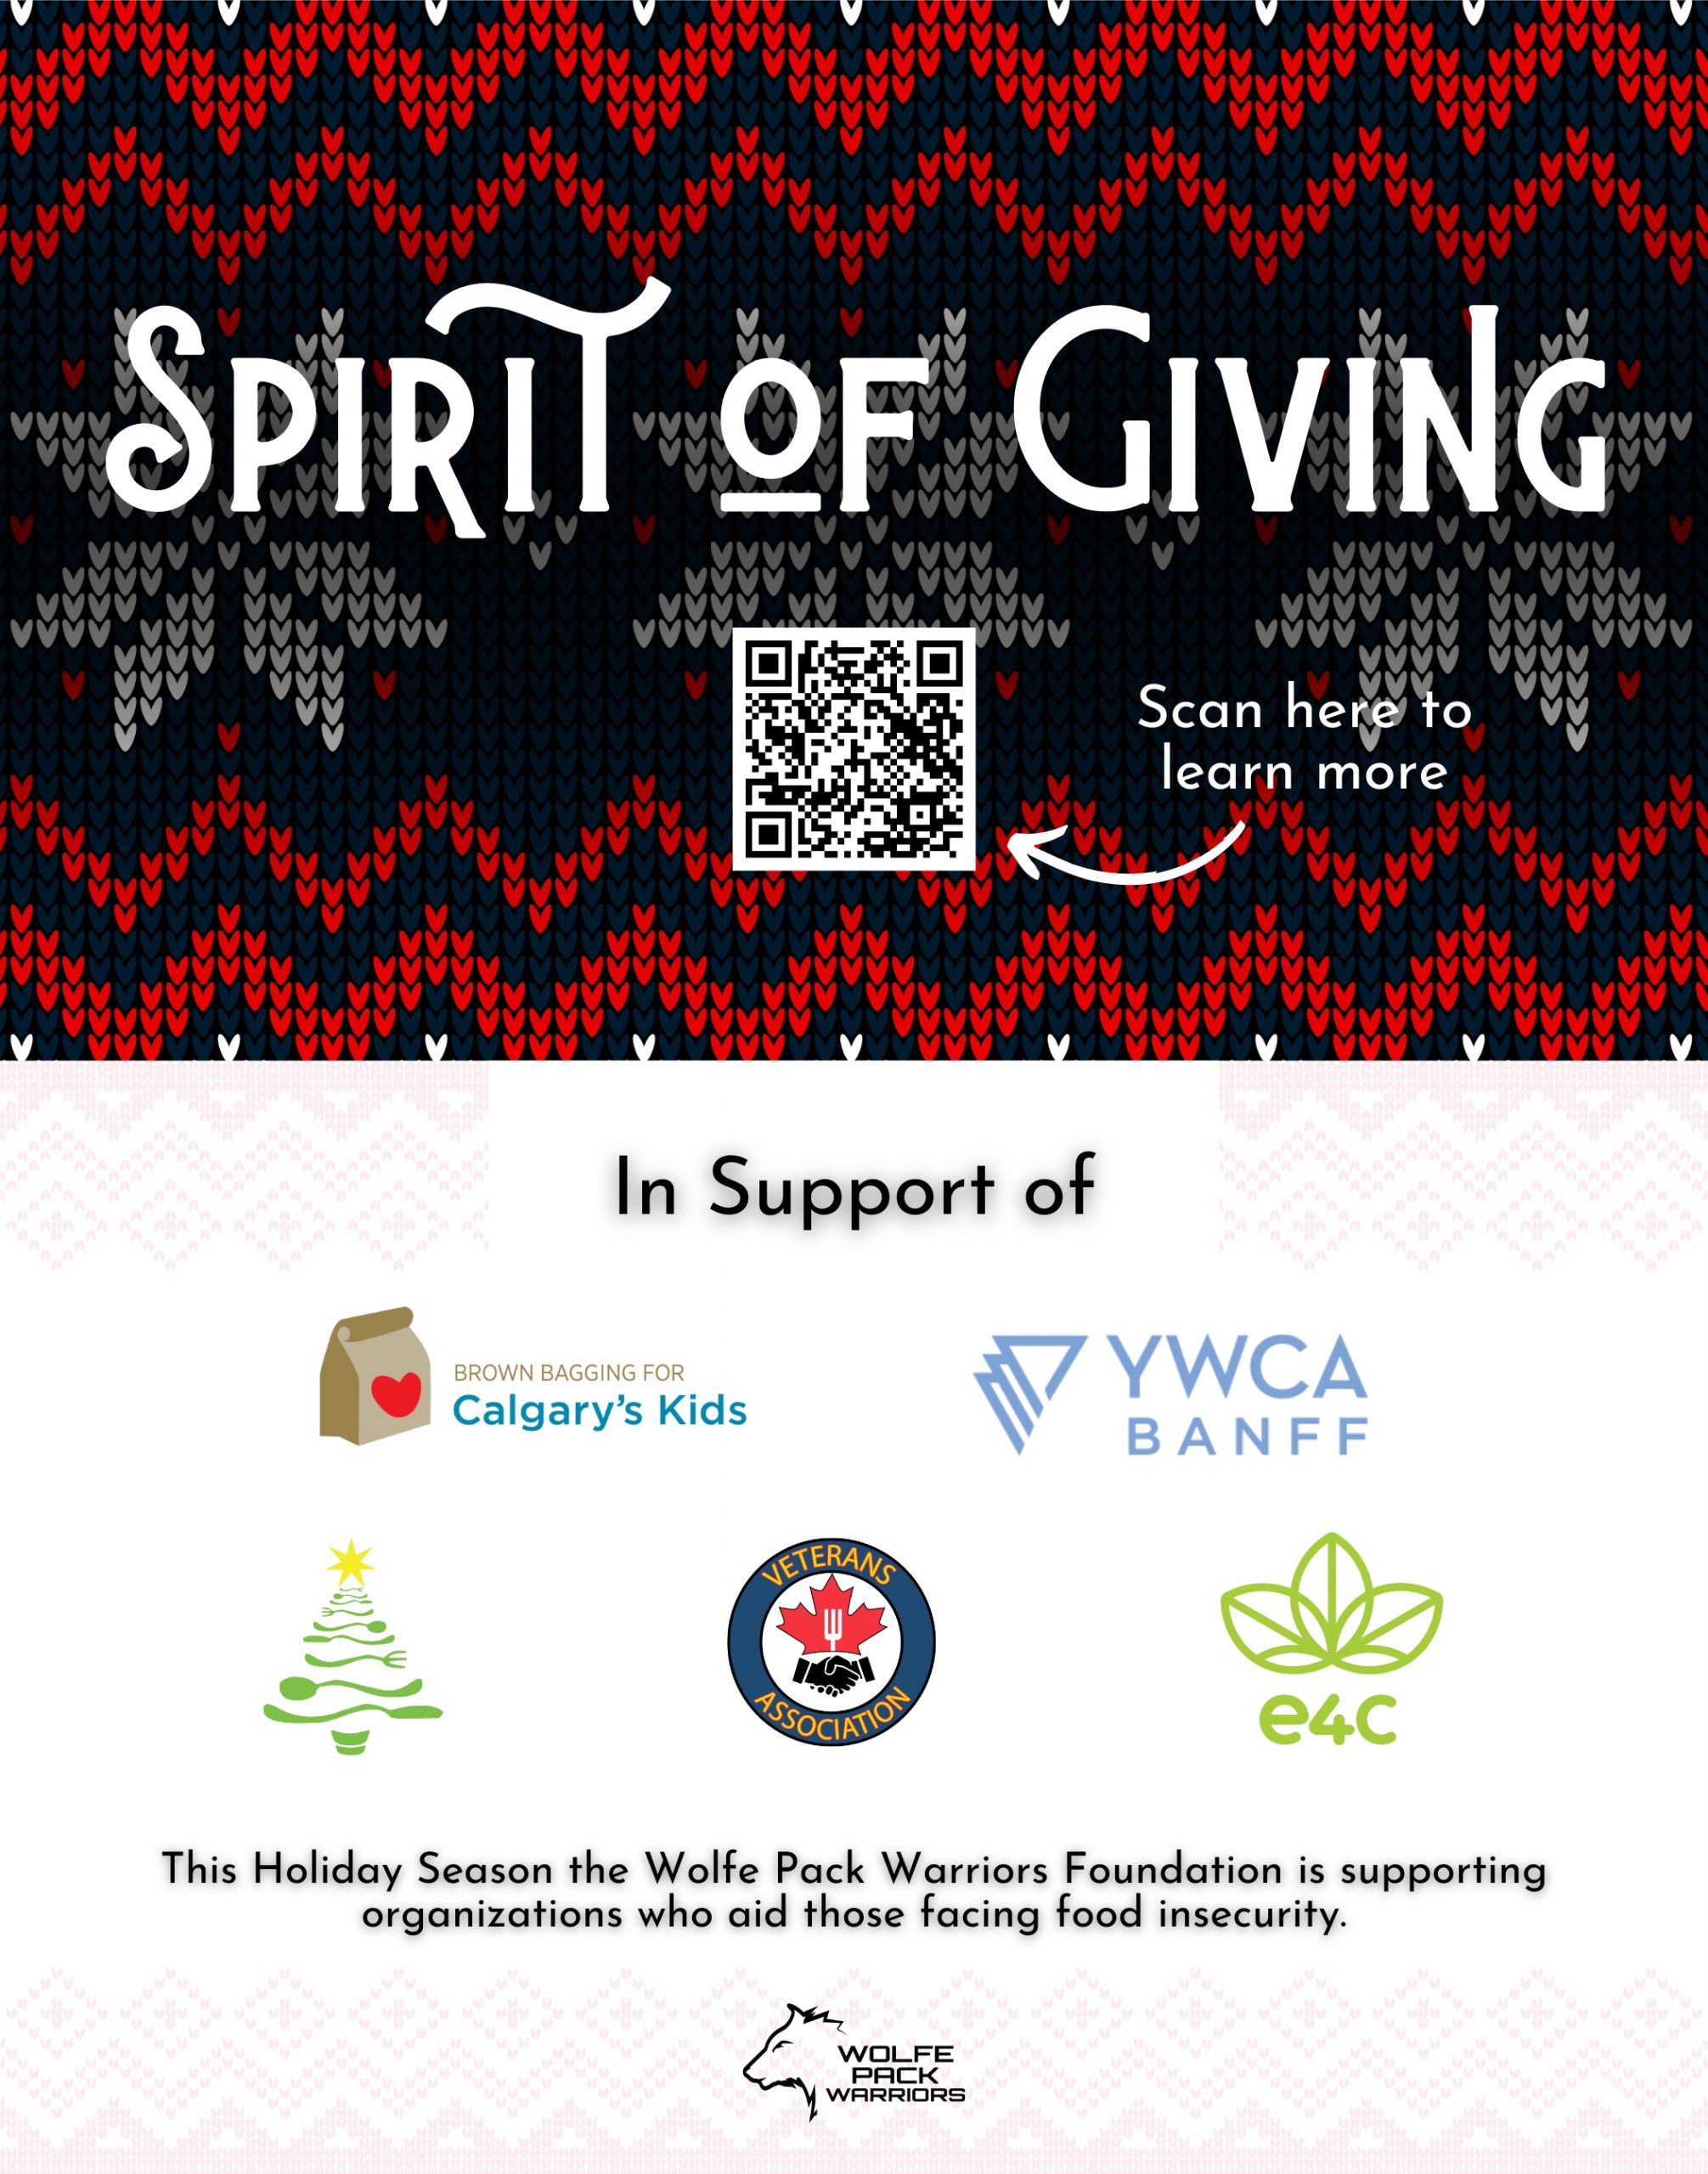 Spirit of Giving 2022 - Wolfe Pack Warriors - Q4 Initiative 